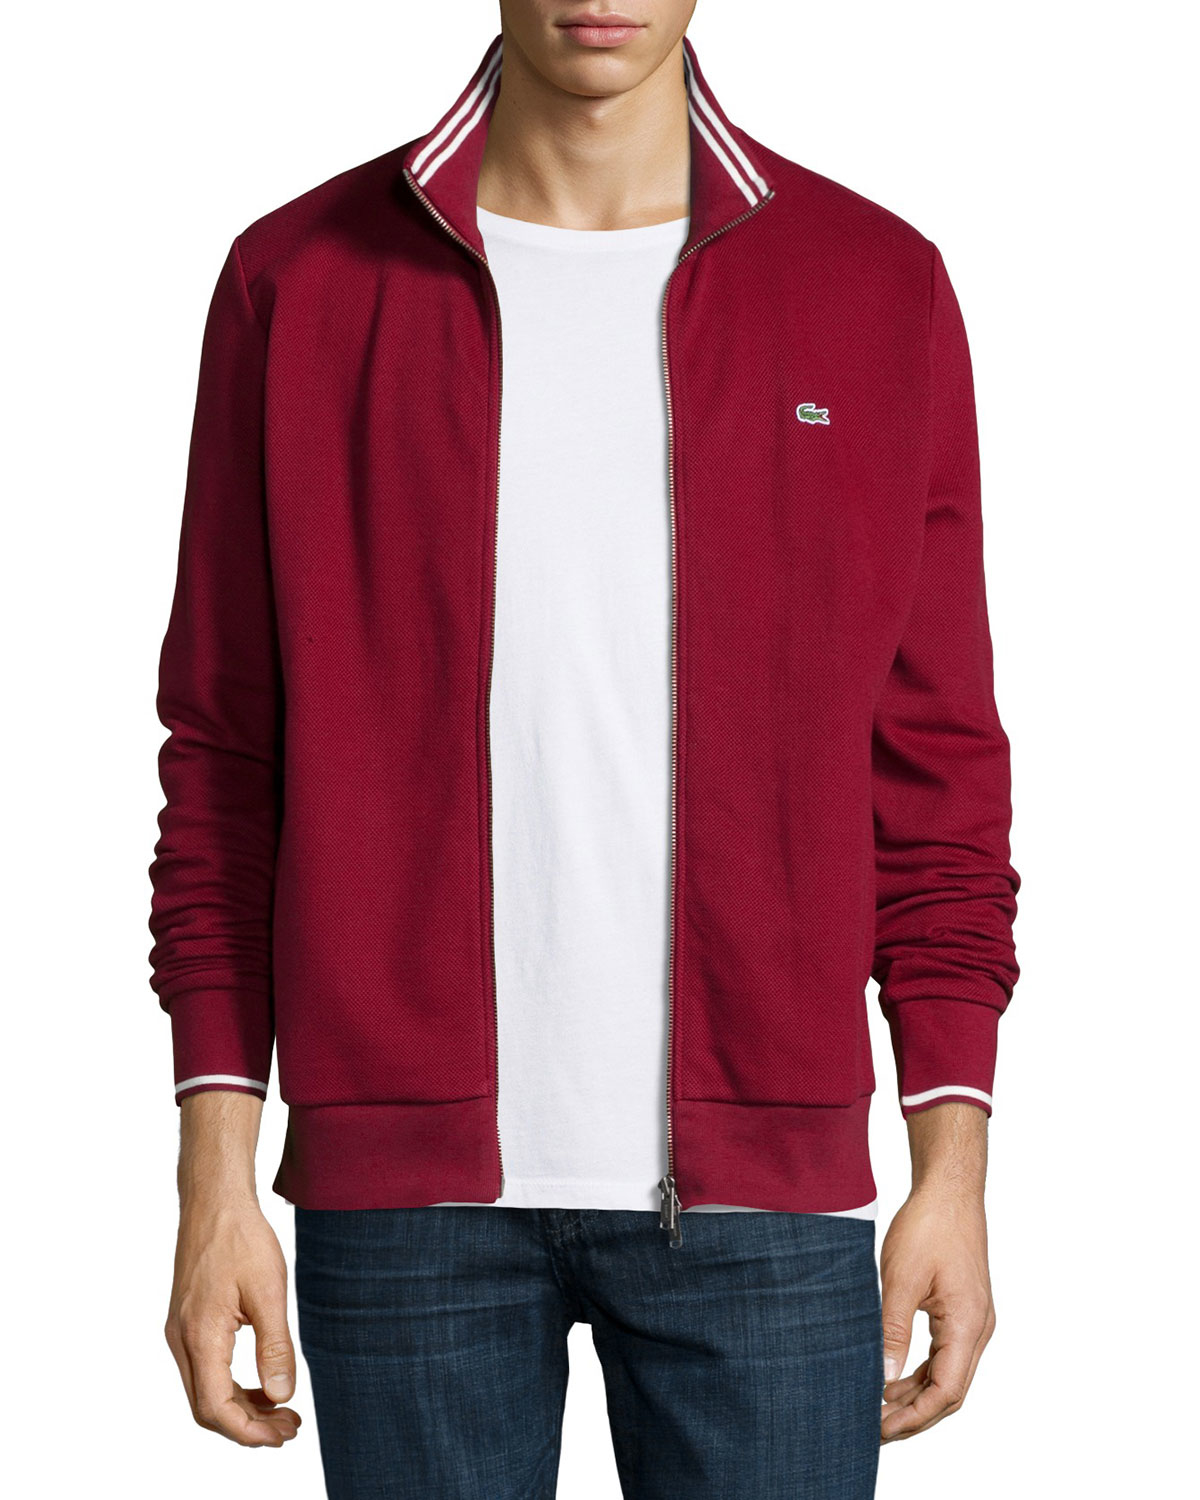 Lyst - Lacoste Full-zip Tipped Track Jacket in Red for Men